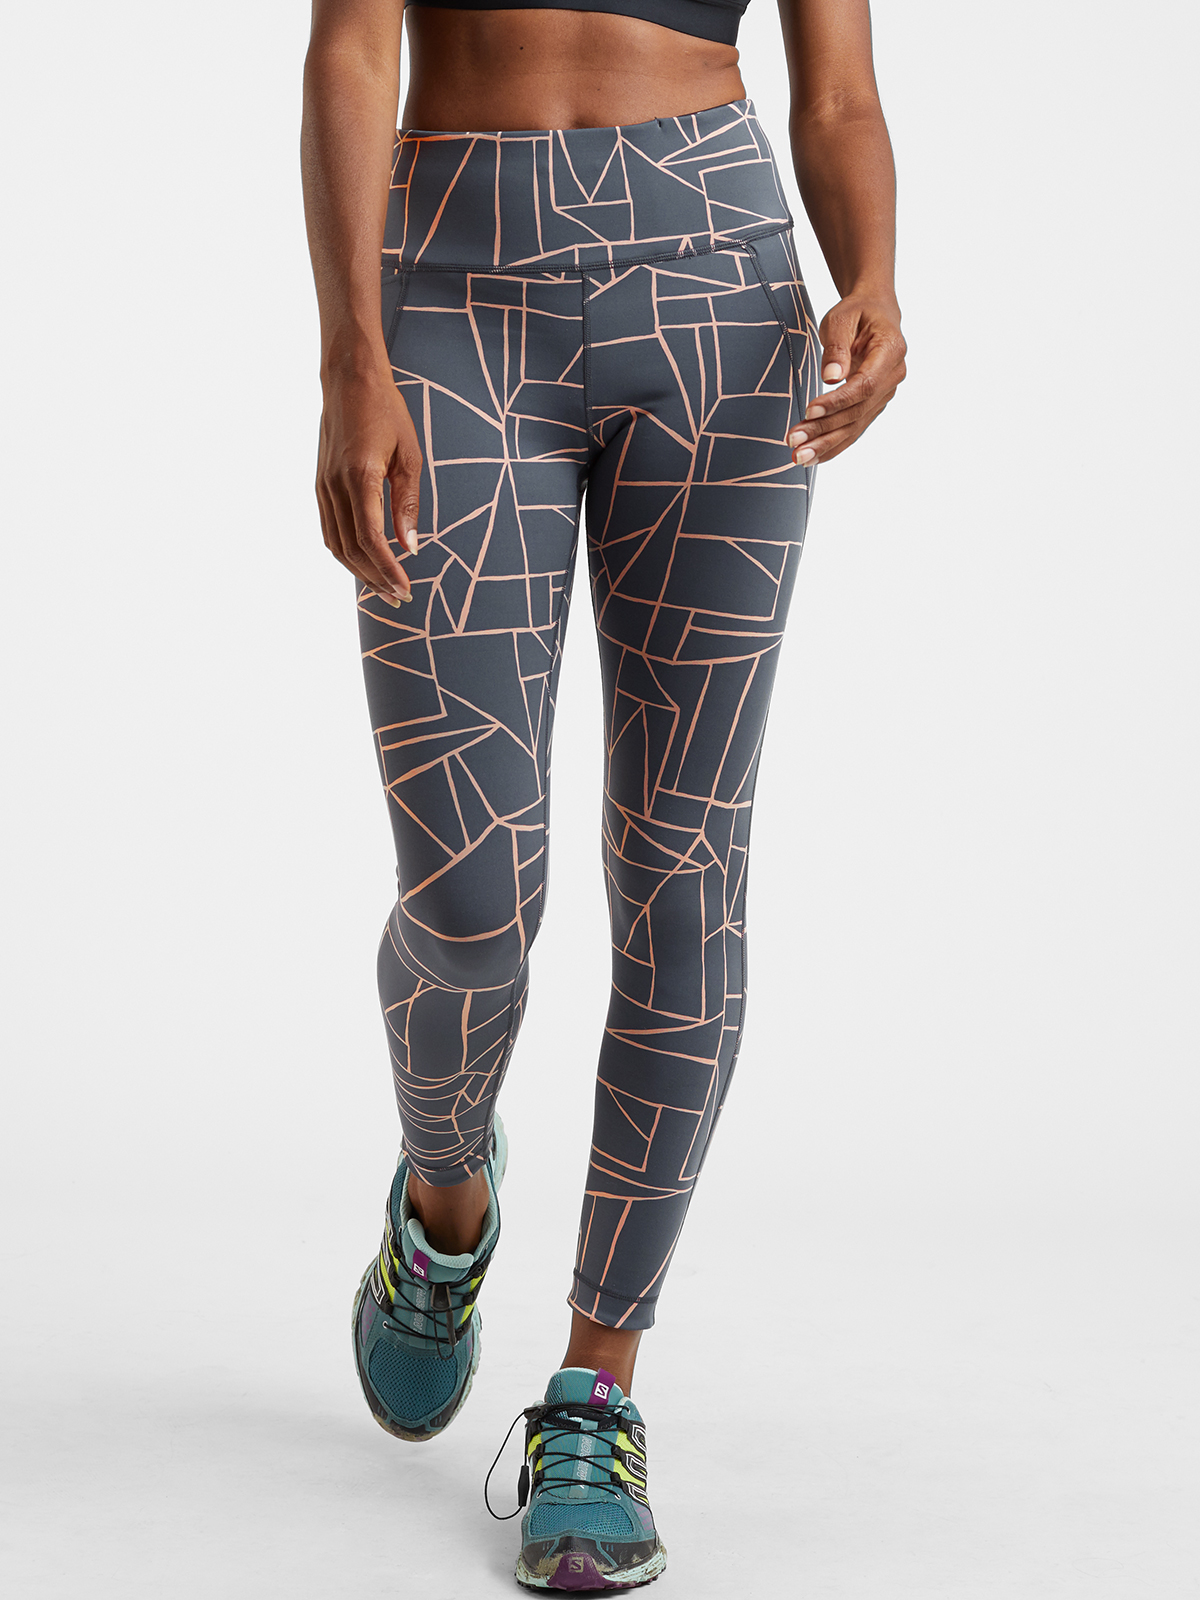 Shop Sports Direct Womens Running Leggings up to 90% Off